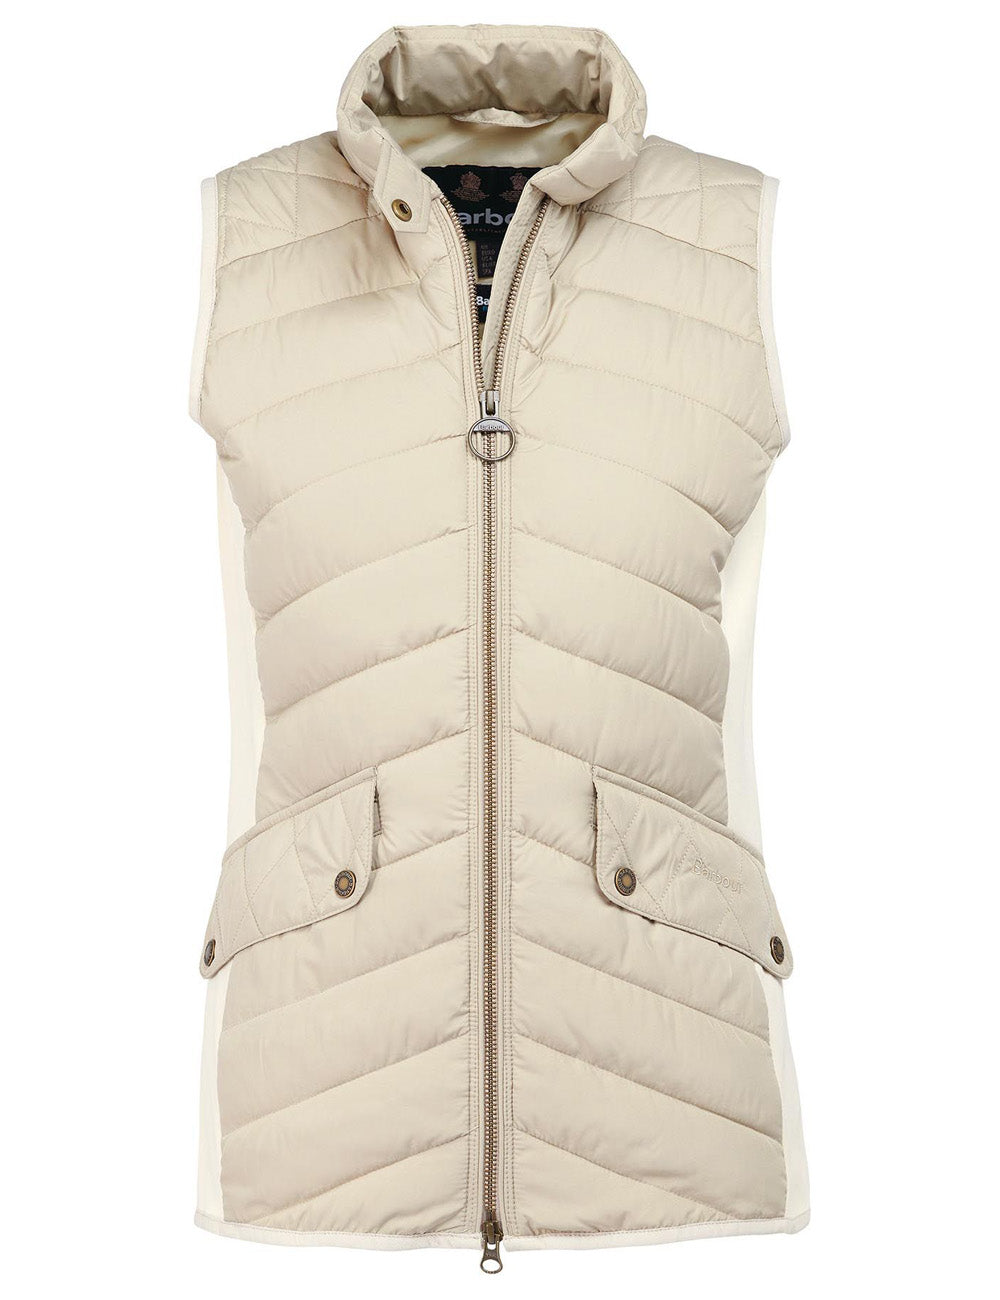 Barbour's Stretch Cavalry Gilet on a white background